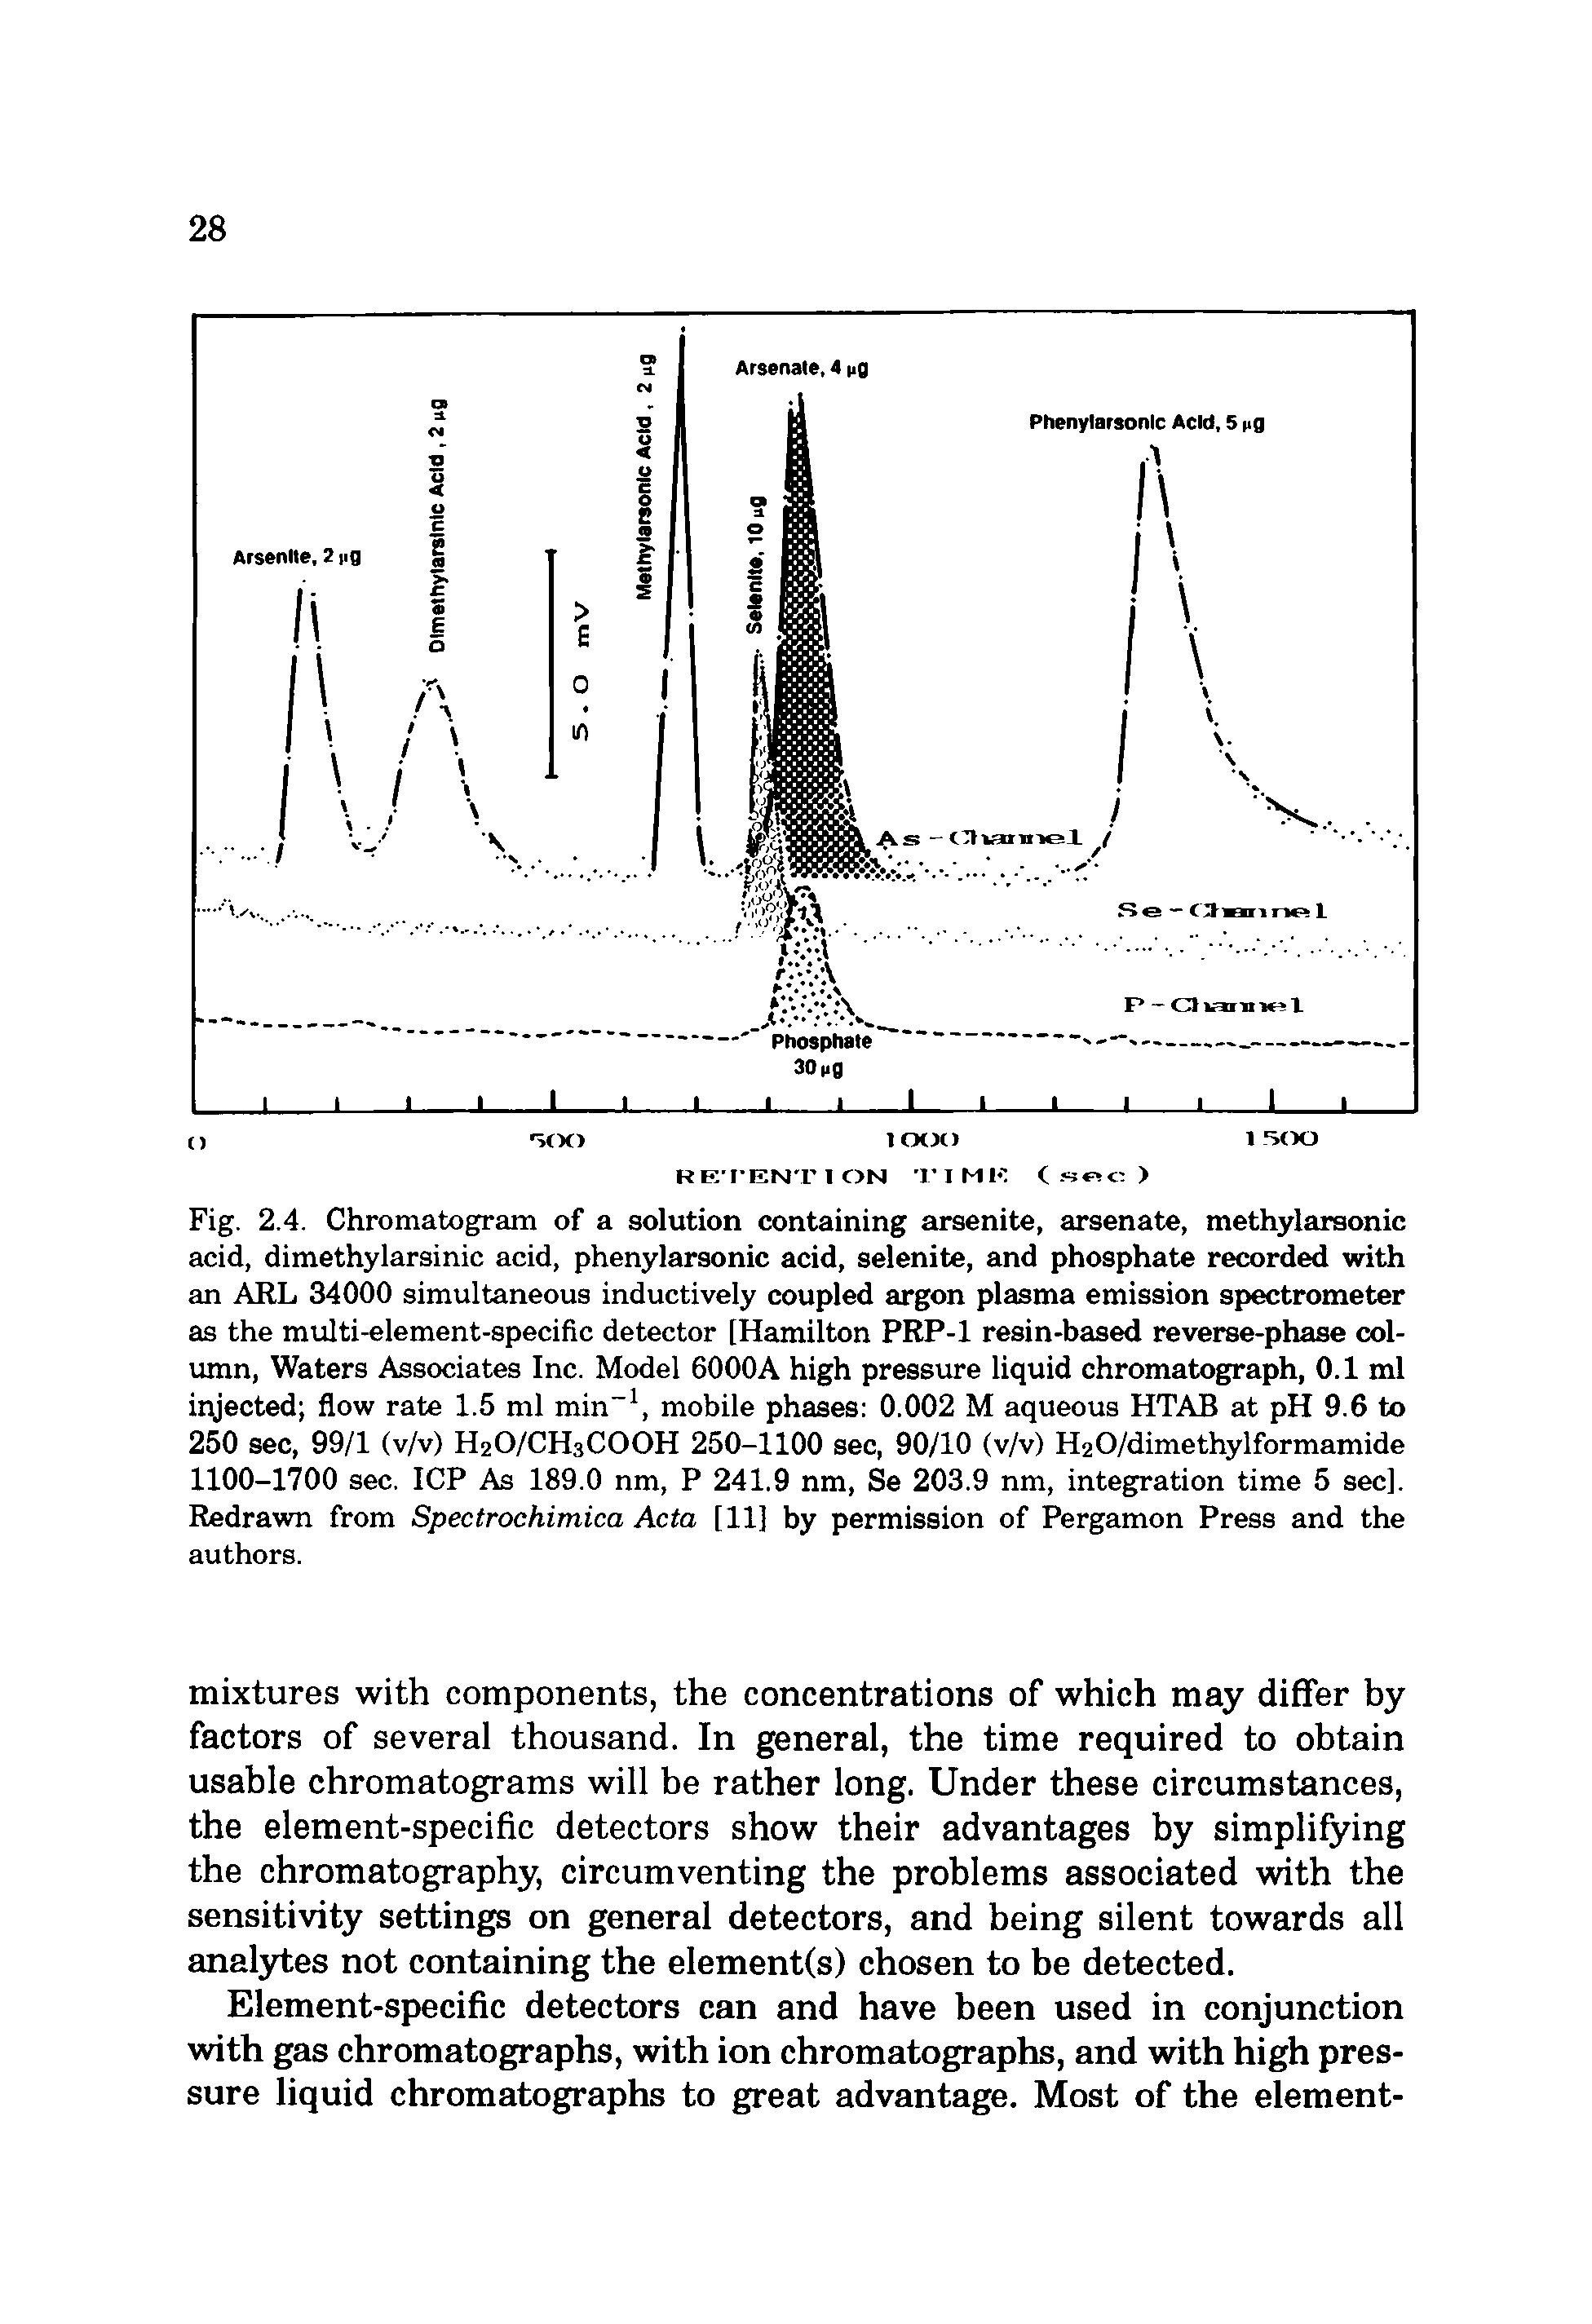 Fig. 2.4. Chromatogram of a solution containing arsenite, arsenate, methylarsonic acid, dimethylarsinic acid, phenylarsonic acid, selenite, and phosphate recorded with an ARL 34000 simultaneous inductively coupled argon plasma emission spectrometer as the multi-element-specific detector [Hamilton PRP-1 resin-based reverse-phase column, Waters Associates Inc. Model 6000A high pressure liquid chromatograph, 0.1 ml injected flow rate 1.5 ml min", mobile phases 0.002 M aqueous HTAB at pH 9.6 to 250 sec, 99/1 (v/v) H2O/CH3COOH 250-1100 sec, 90/10 (v/v) H20/dimethylformamide 1100-1700 sec. ICP As 189.0 nm, P 241.9 nm, Se 203.9 nm, integration time 5 sec]. Redrawn from Spectrochimica Acta [11] by permission of Pergamon Press and the authors.